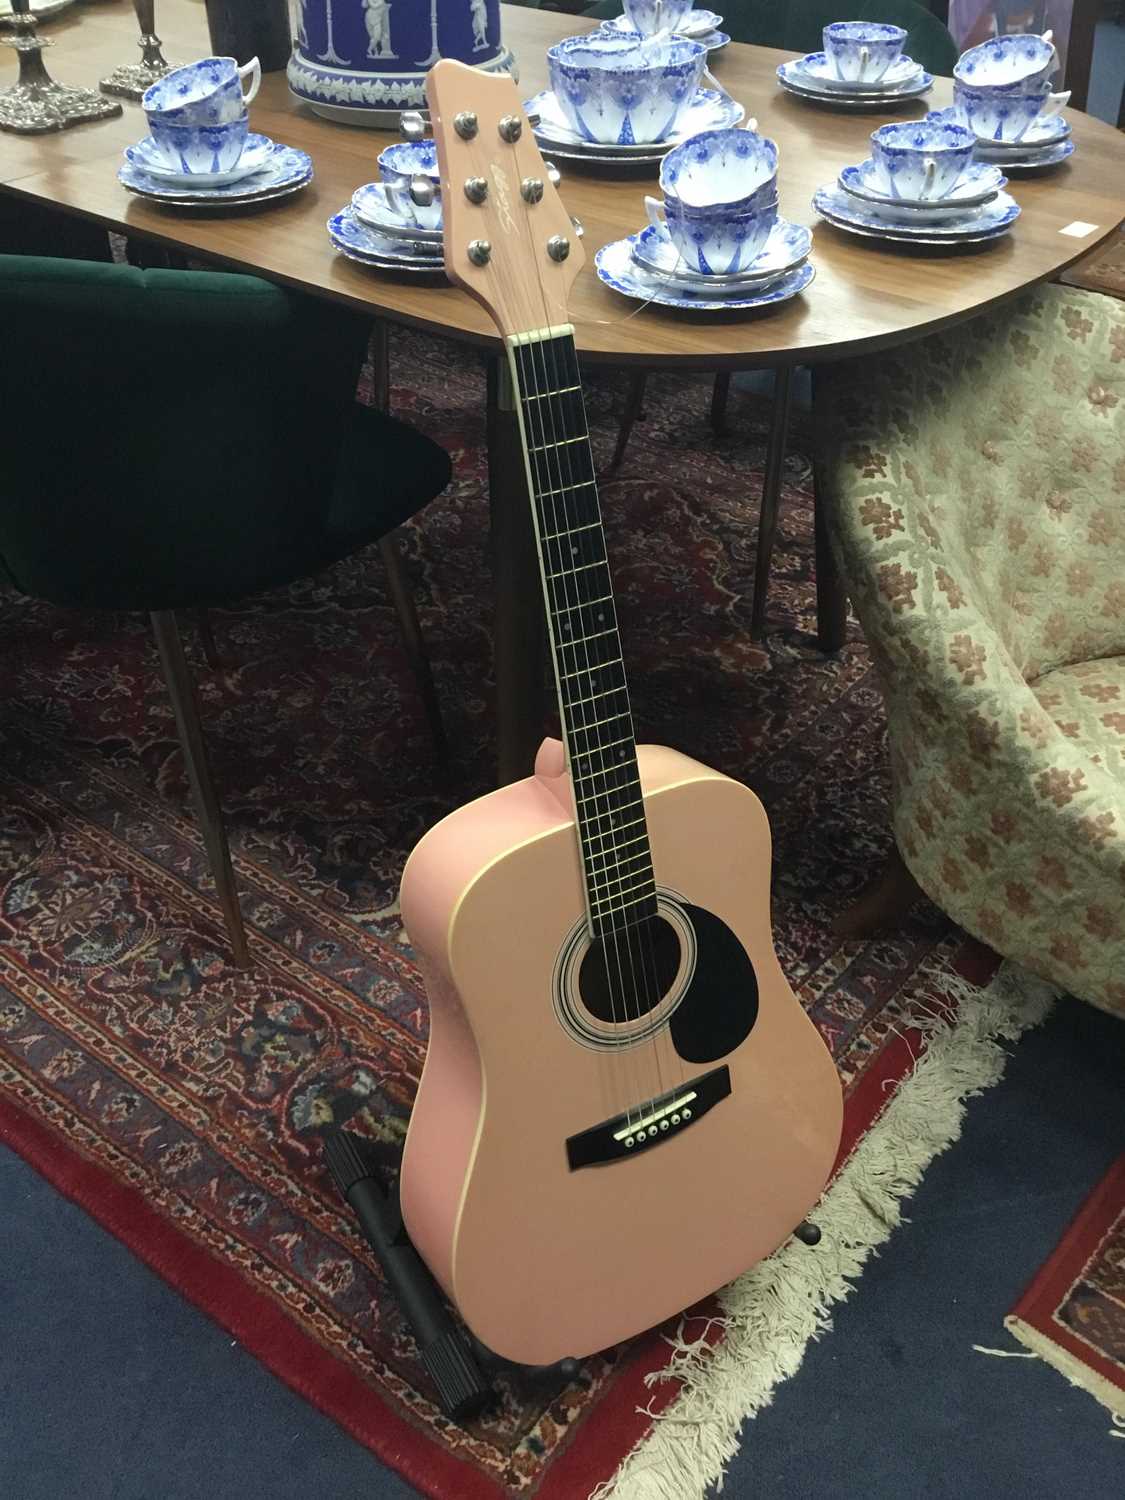 Lot 40 - A CHILD'S PINK ACOUSTIC GUITAR ON STAND